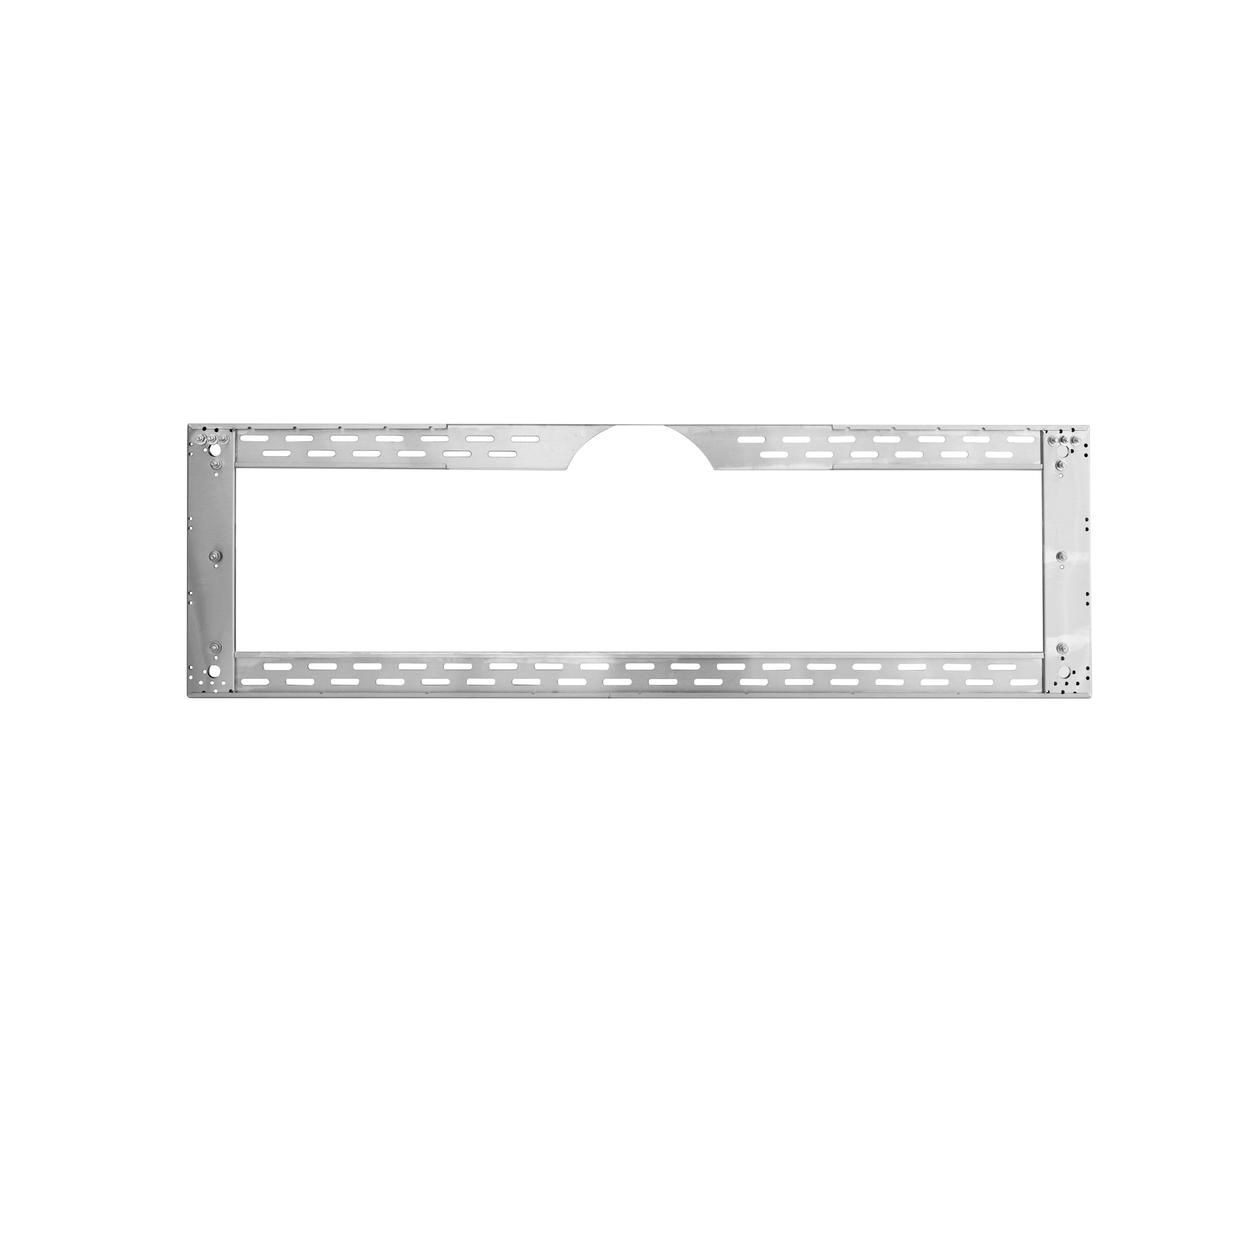 48" Vent Hood Spacer Template